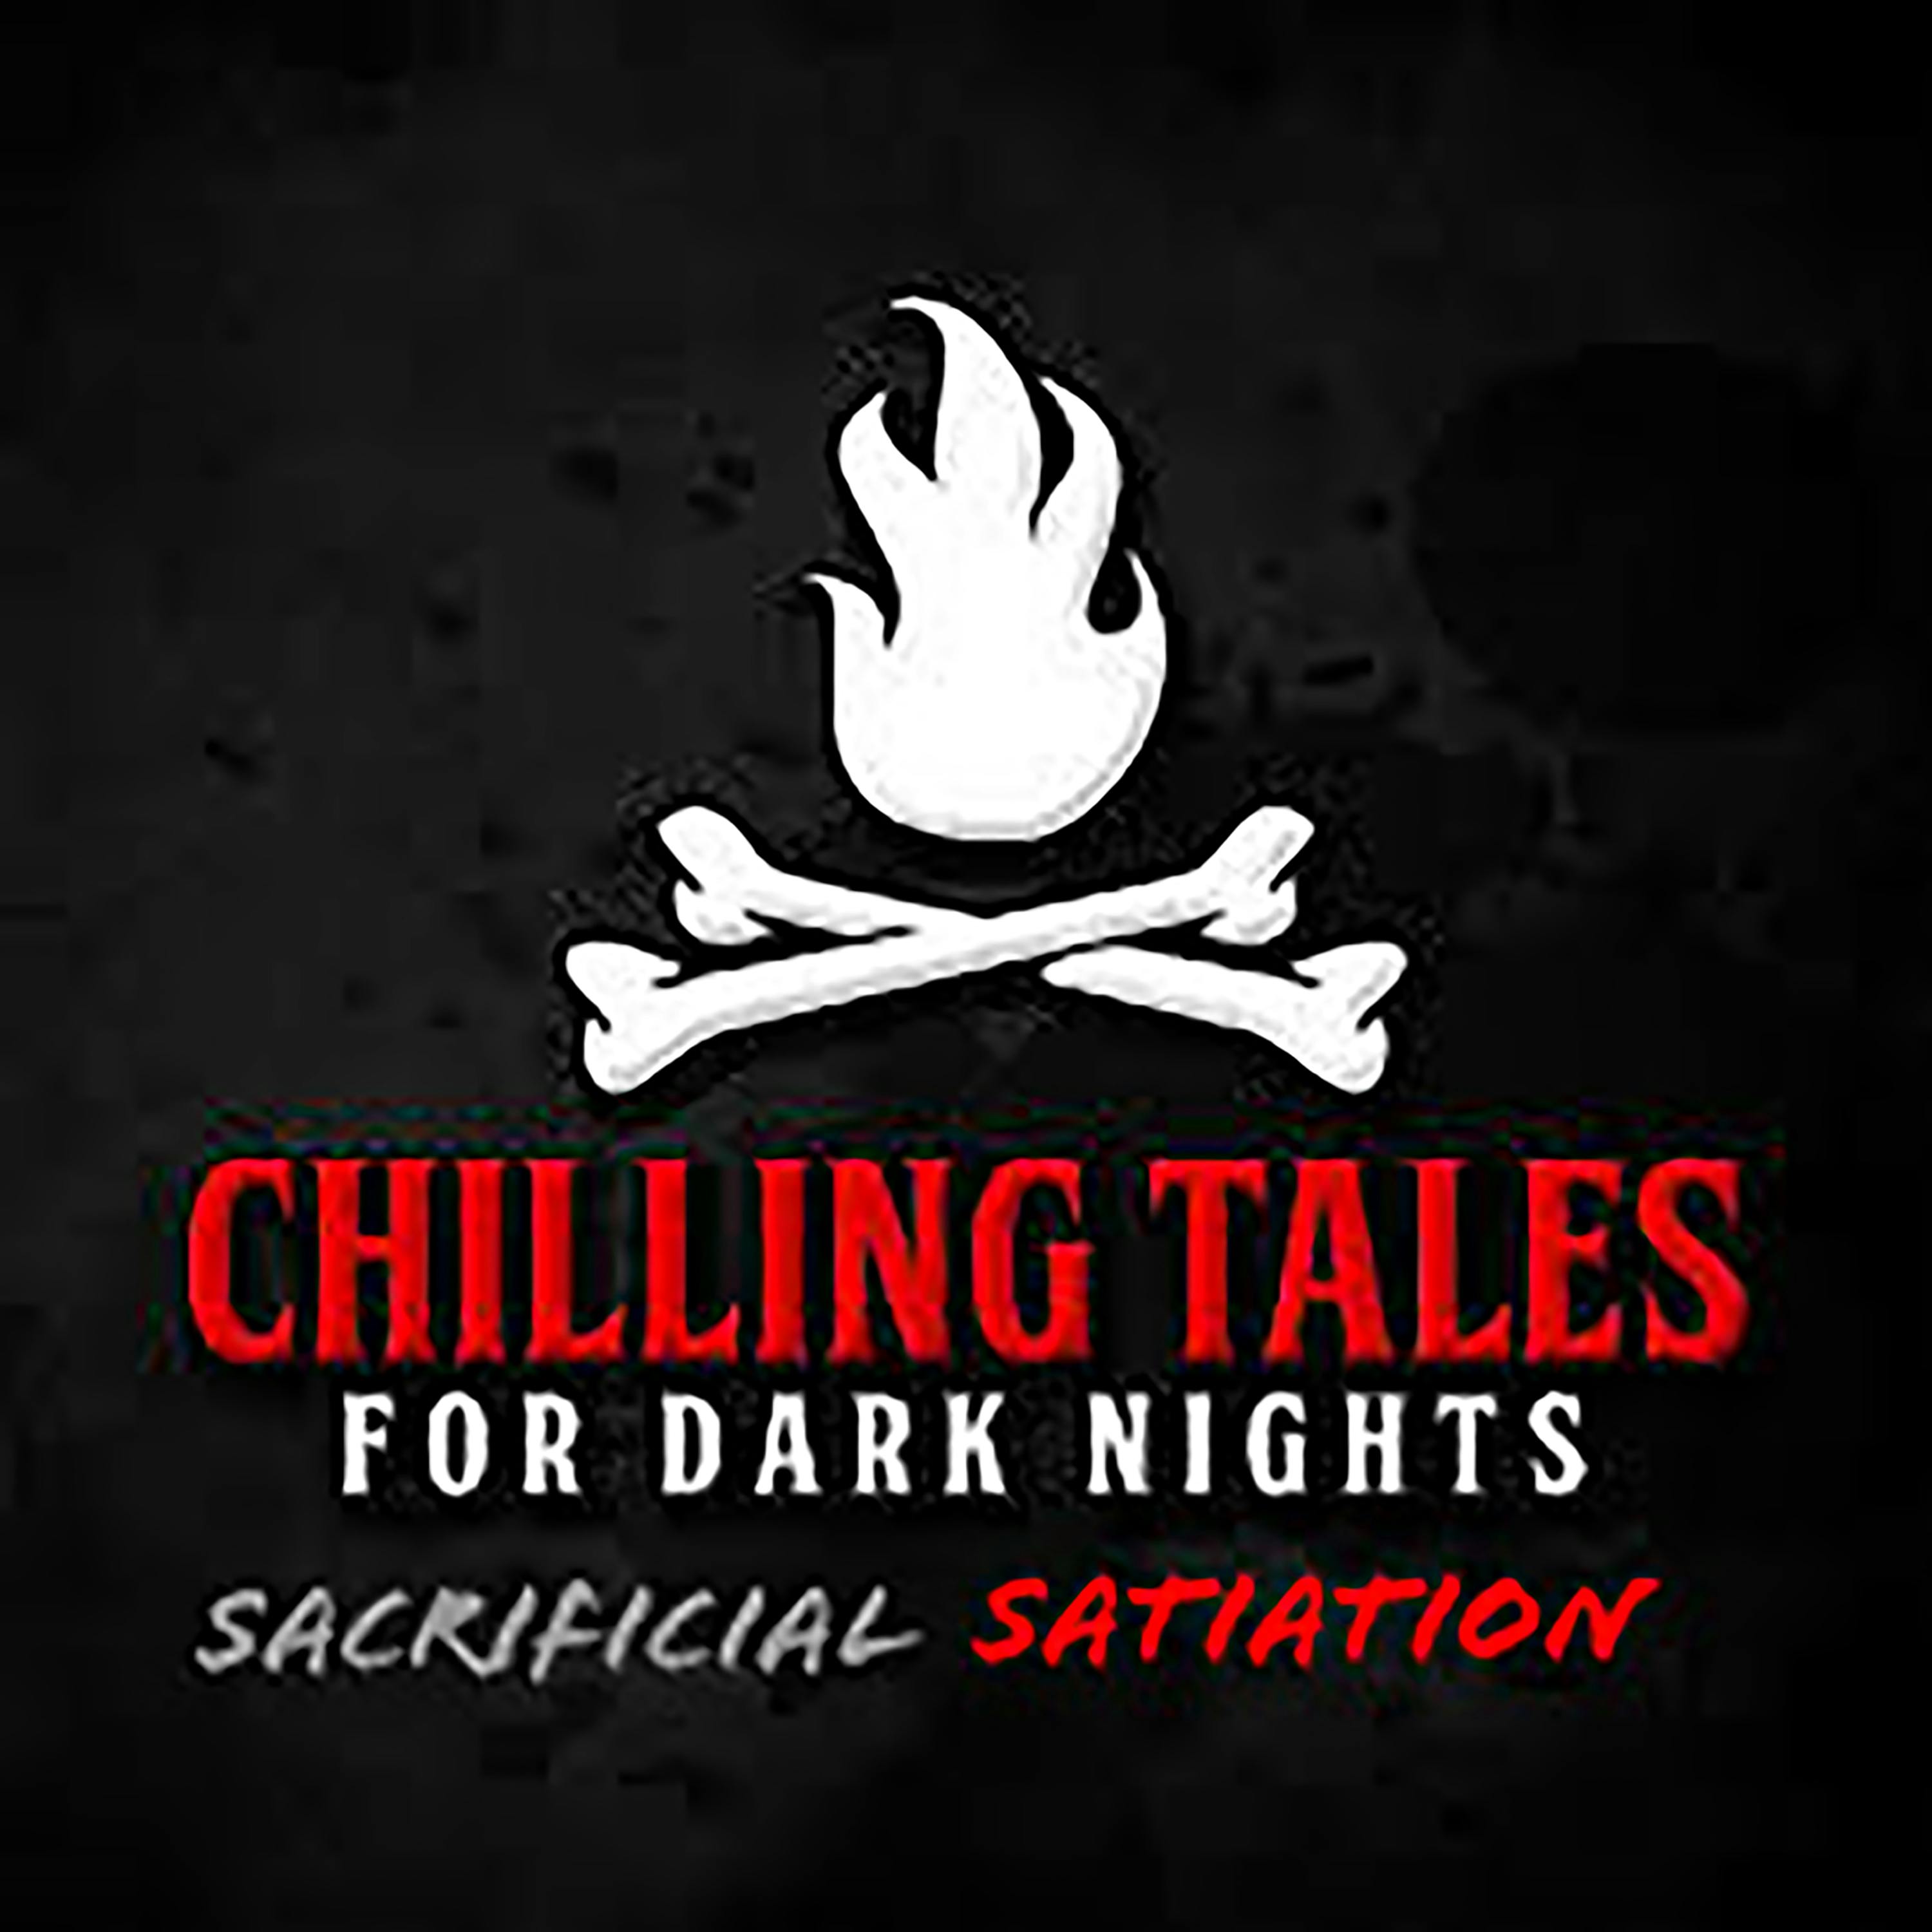 98: Sacrificial Satiation - Chilling Tales for Dark Nights